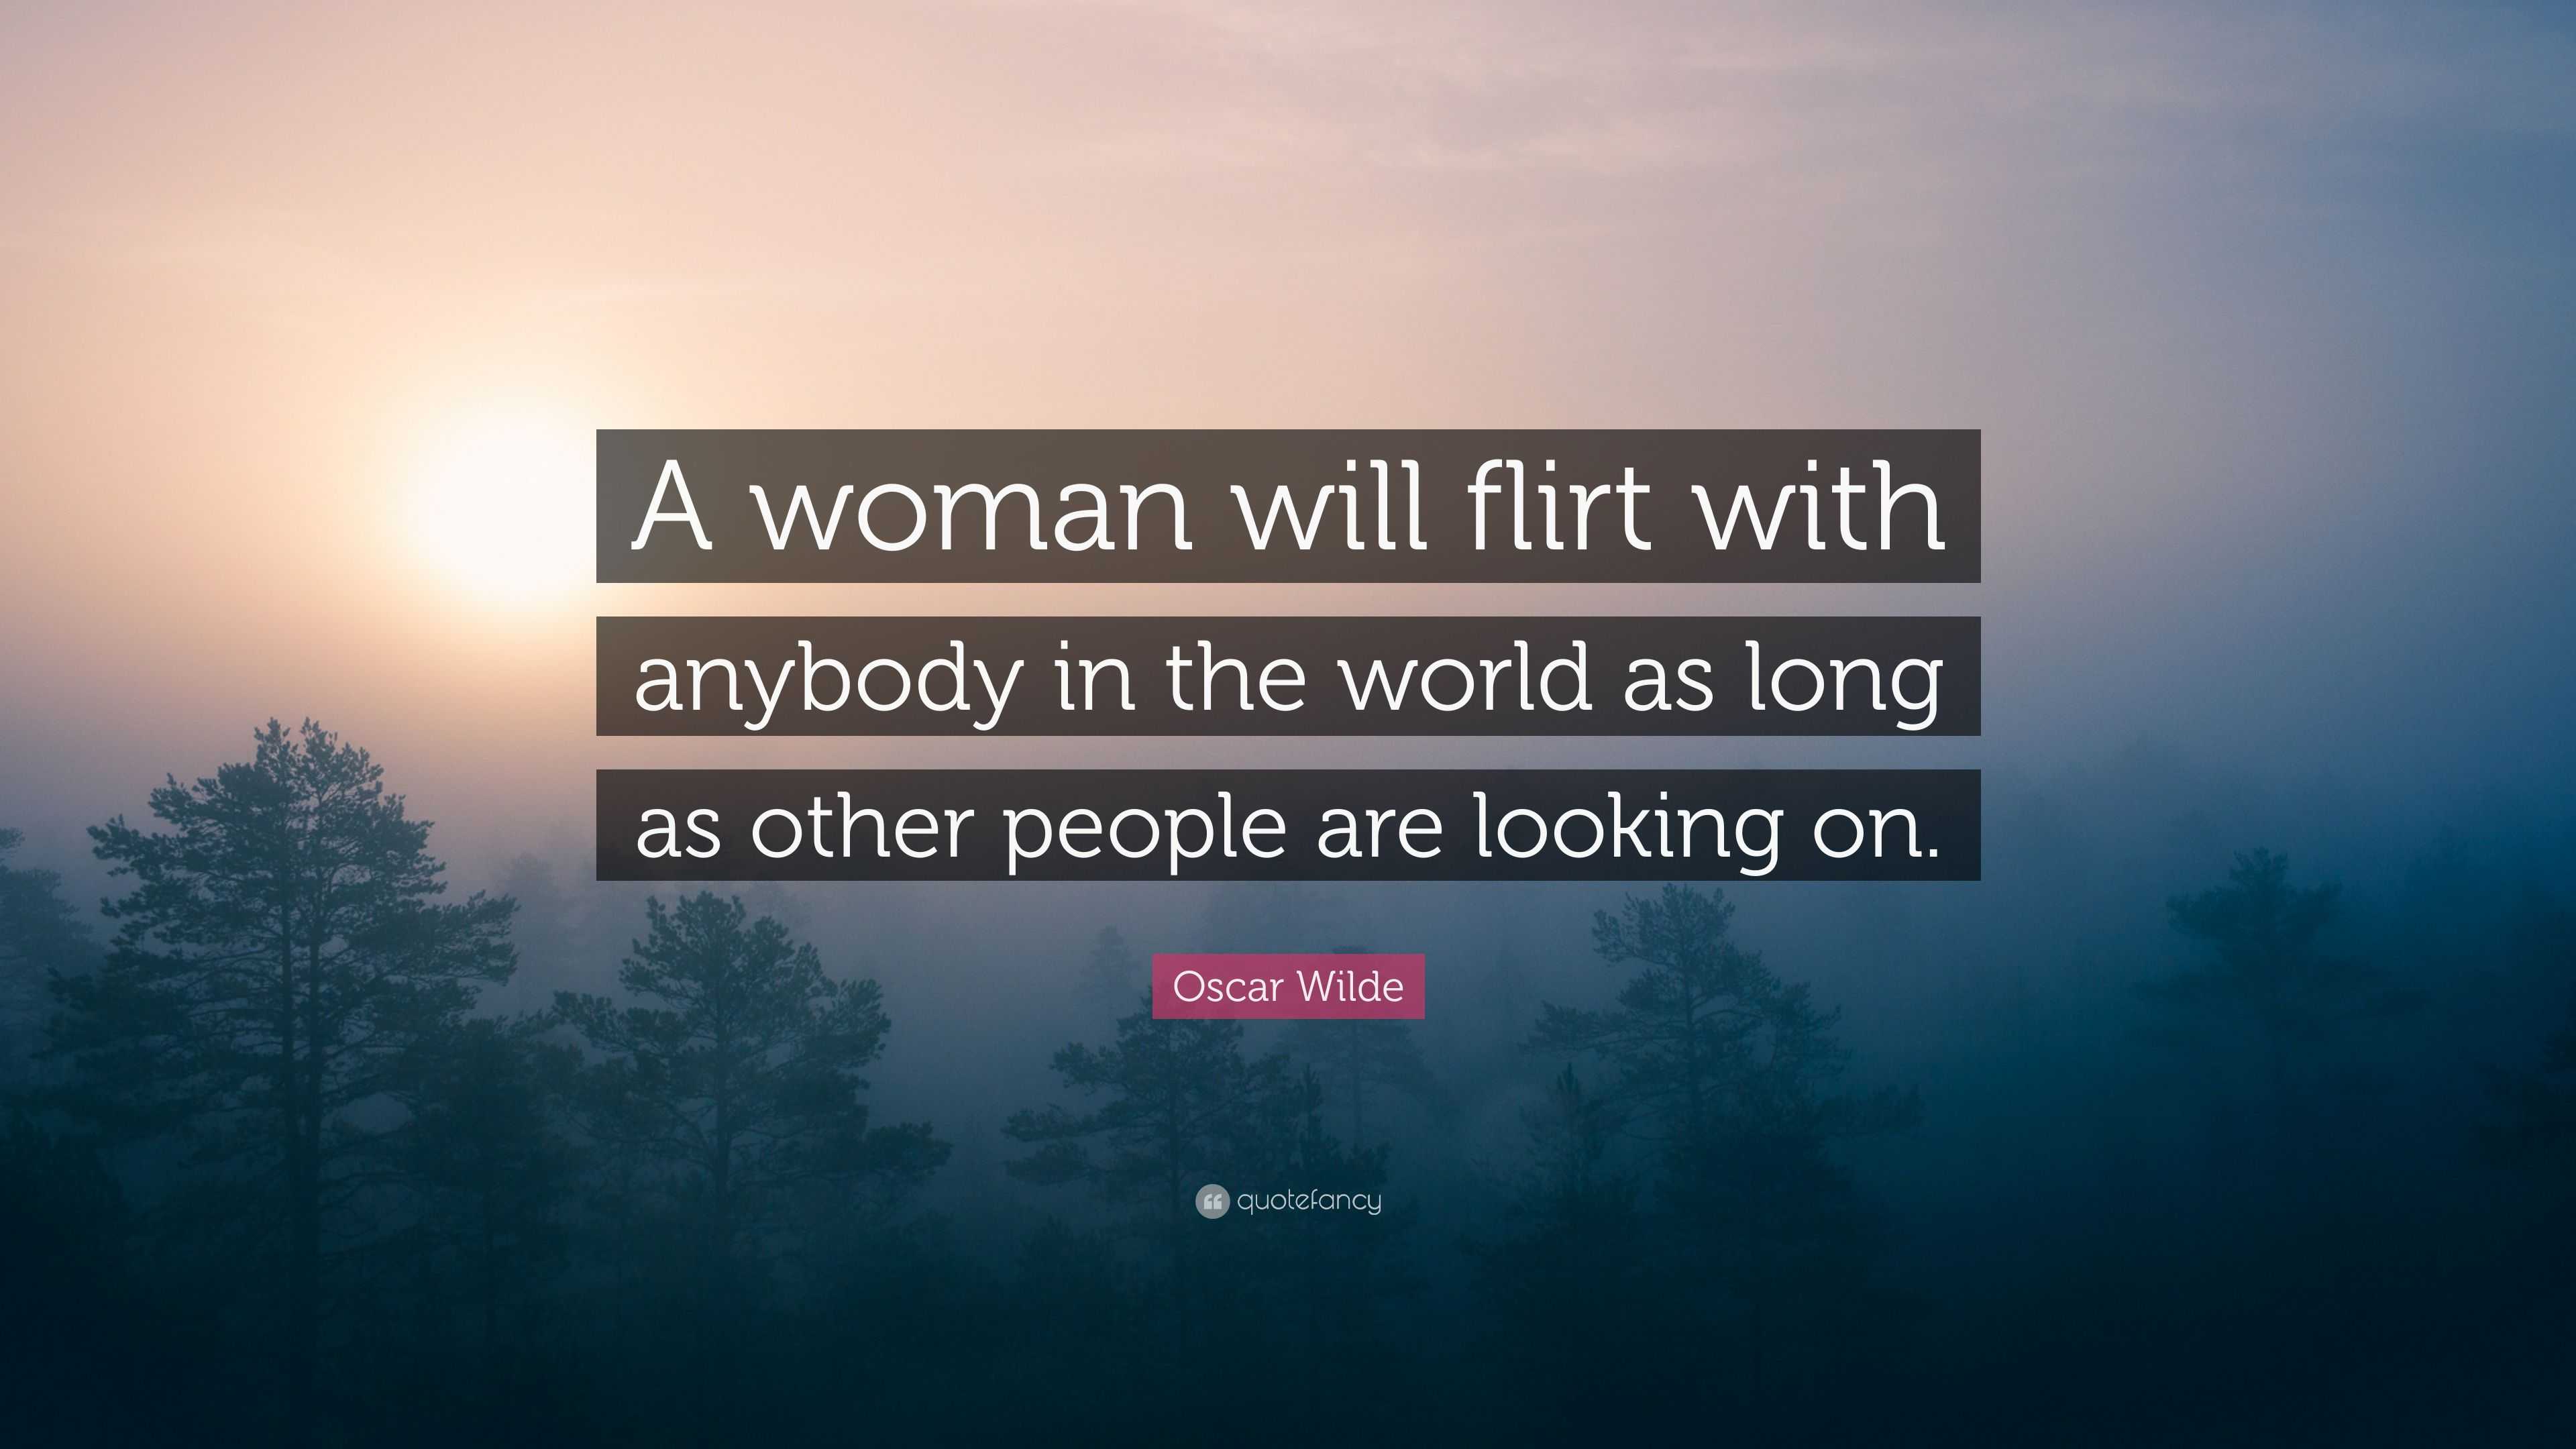 Oscar Wilde Quote: “A woman will flirt with anybody in the world as ...